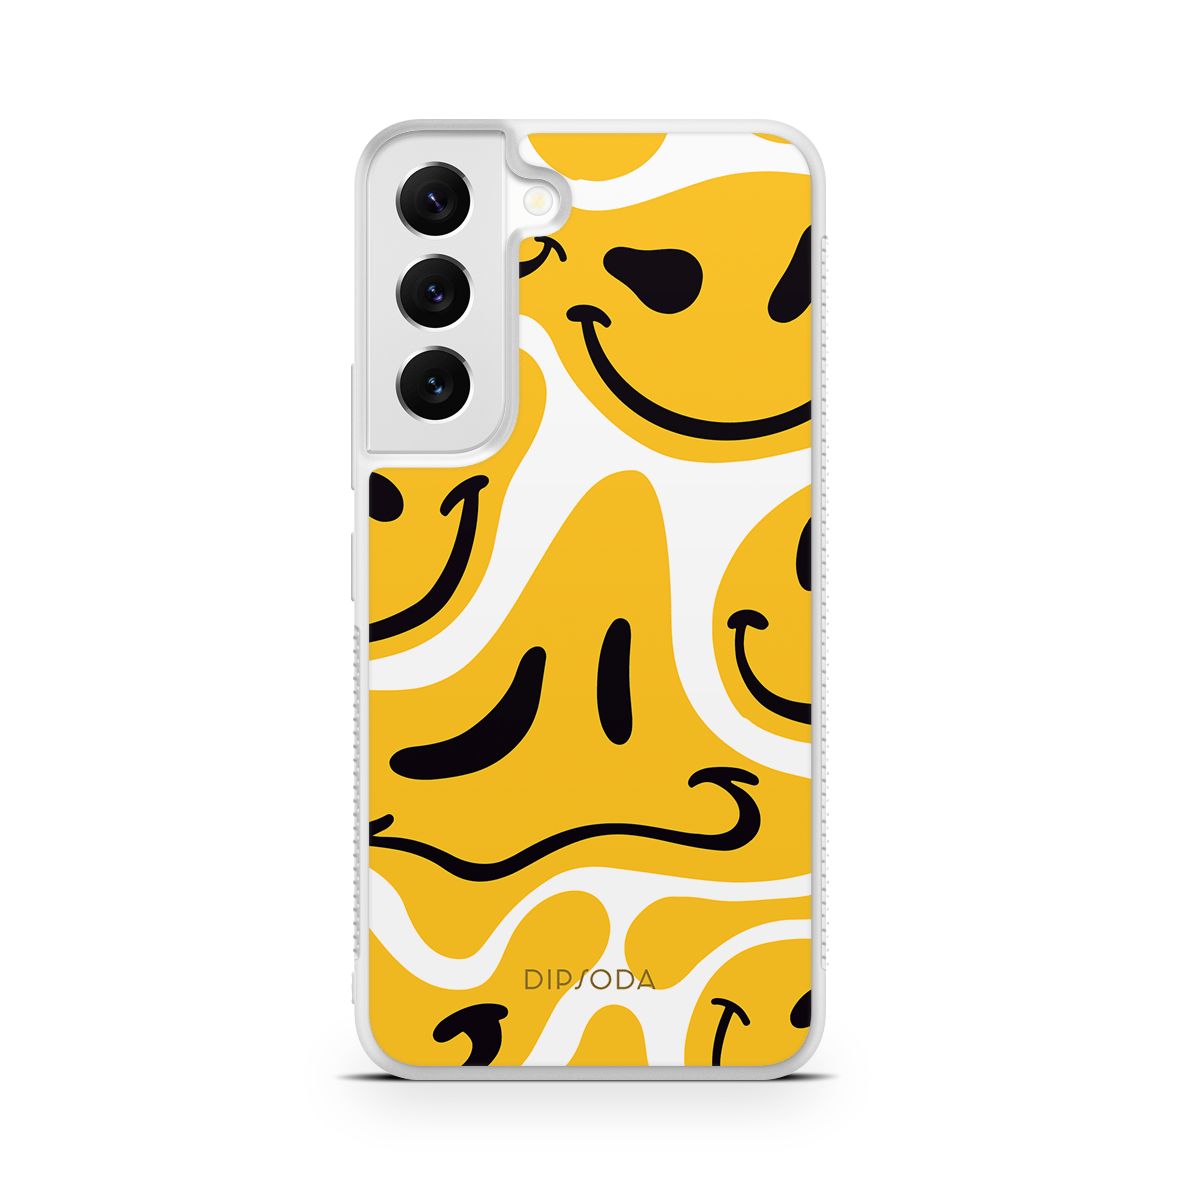 Stay Smiley Rubber Phone Case